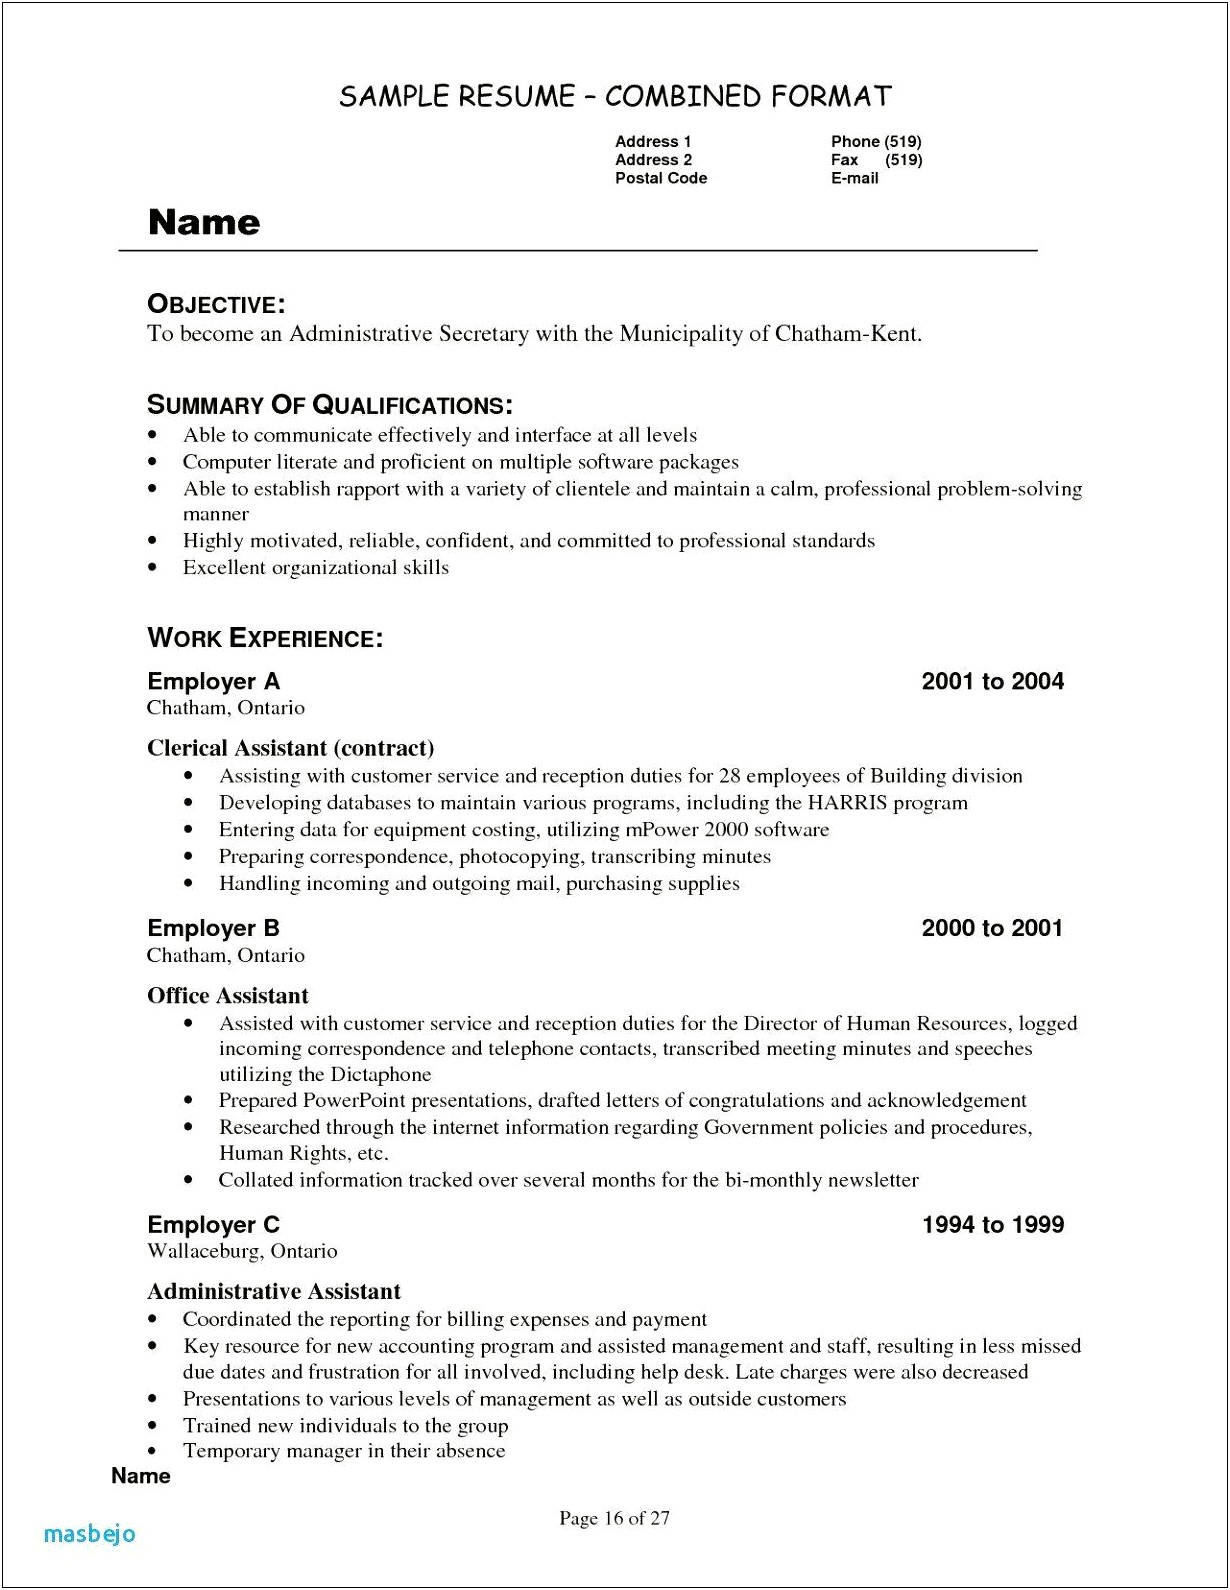 Resume Objective Examples Entry Level Receptionist